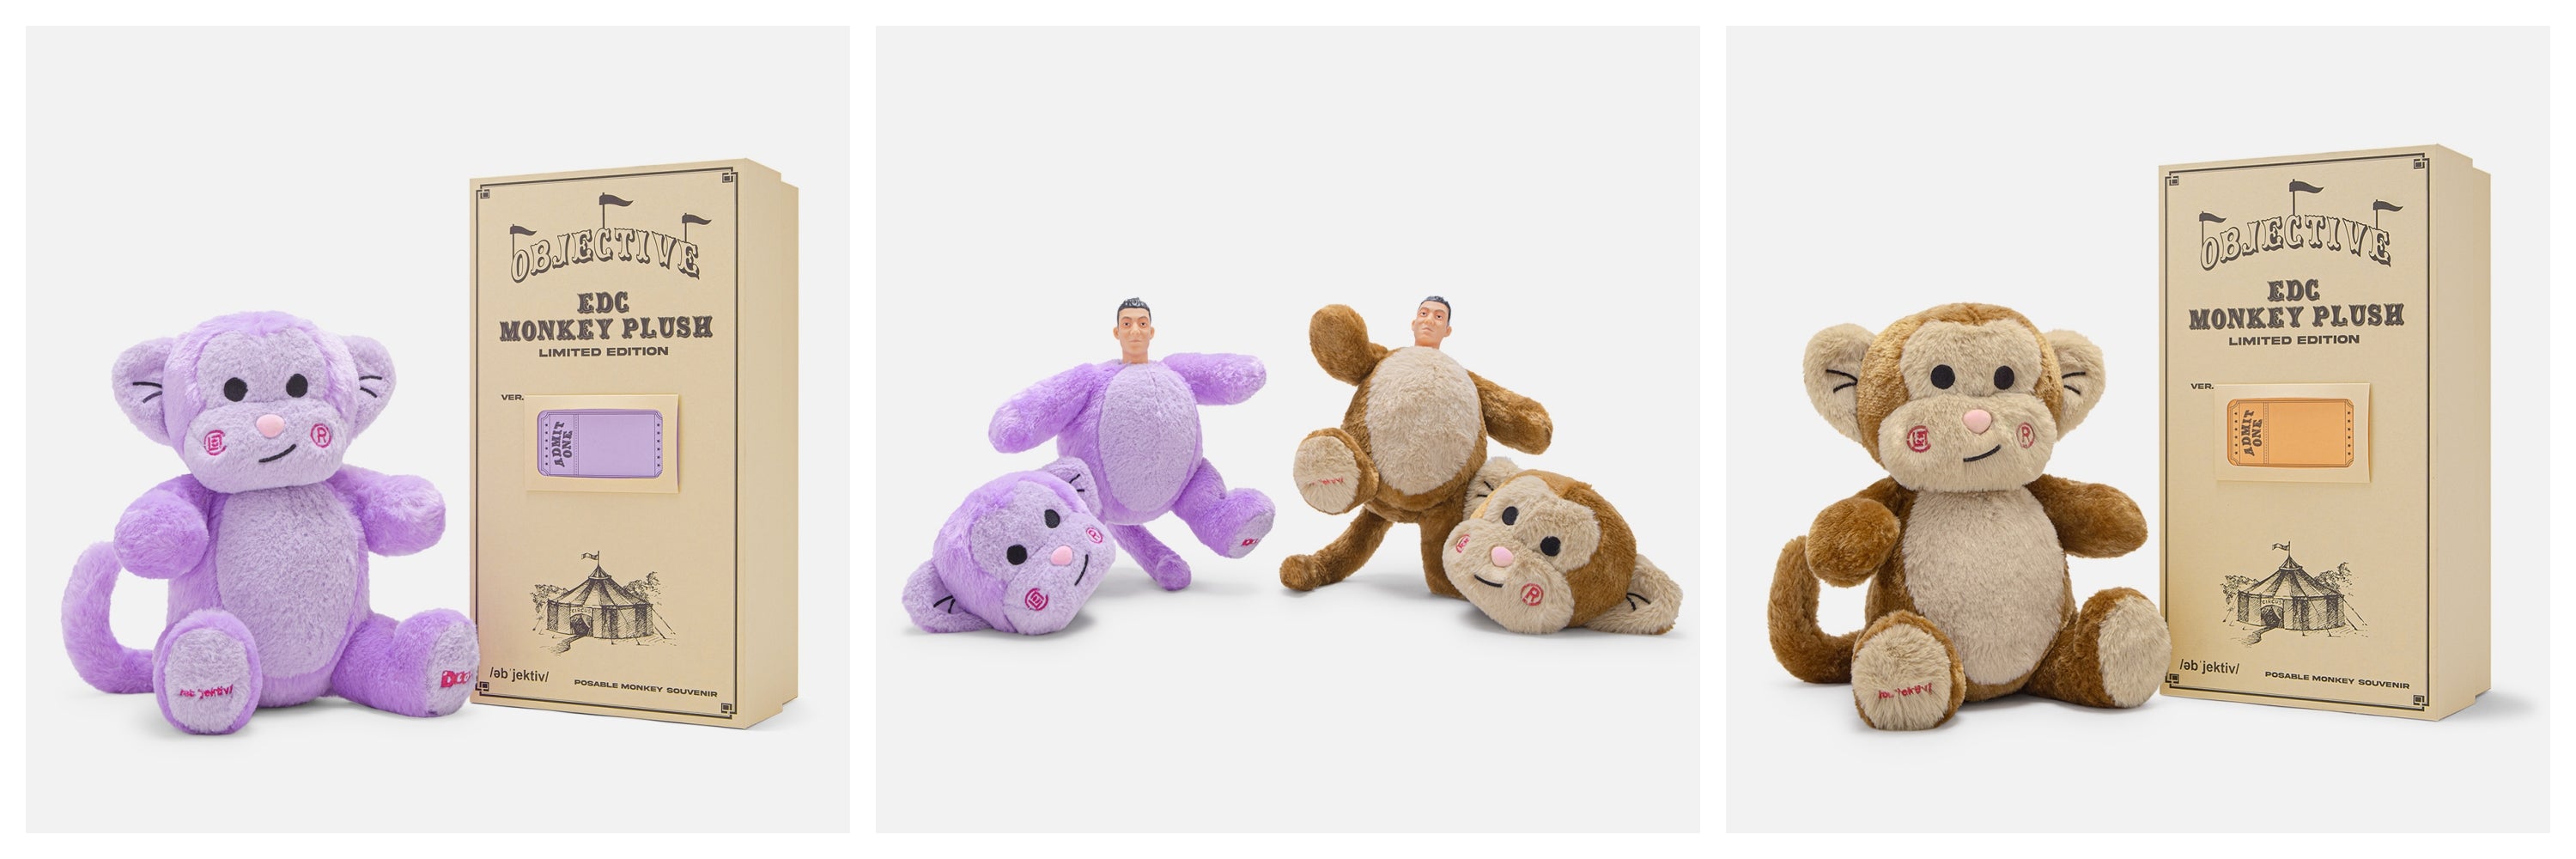 Edison Chen and Objective Collectibles EDC Monkey Plush